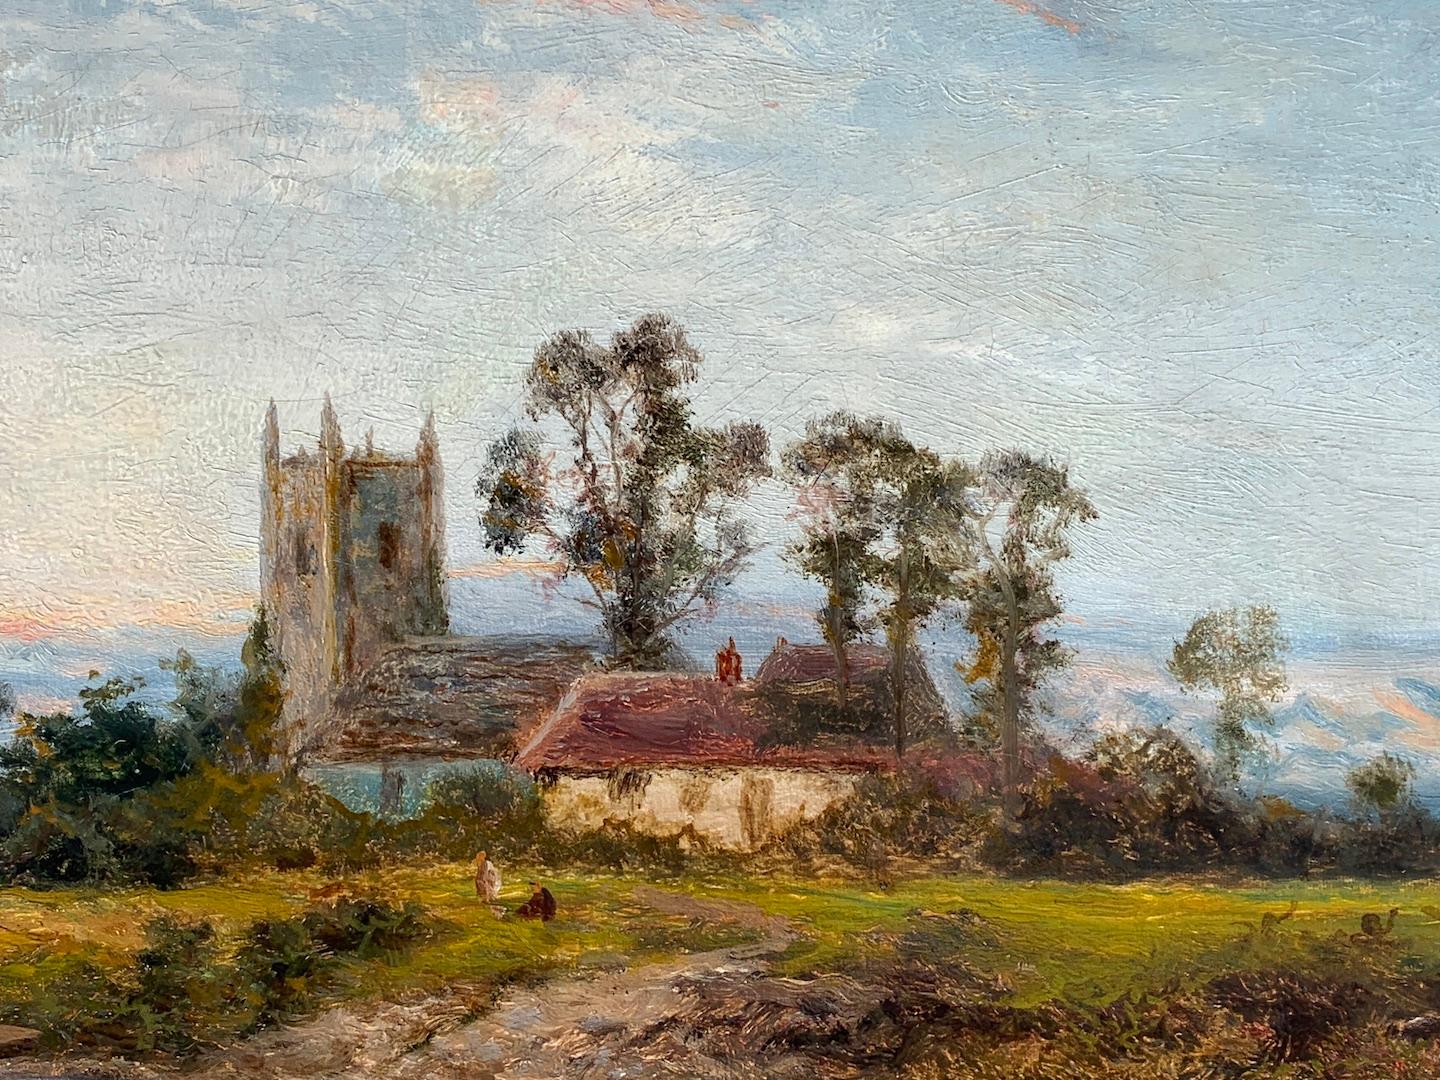 Antique oil on canvas, English landscape with River, Church, Cottage at Sunrise - Brown Figurative Painting by Daniel Sherrin